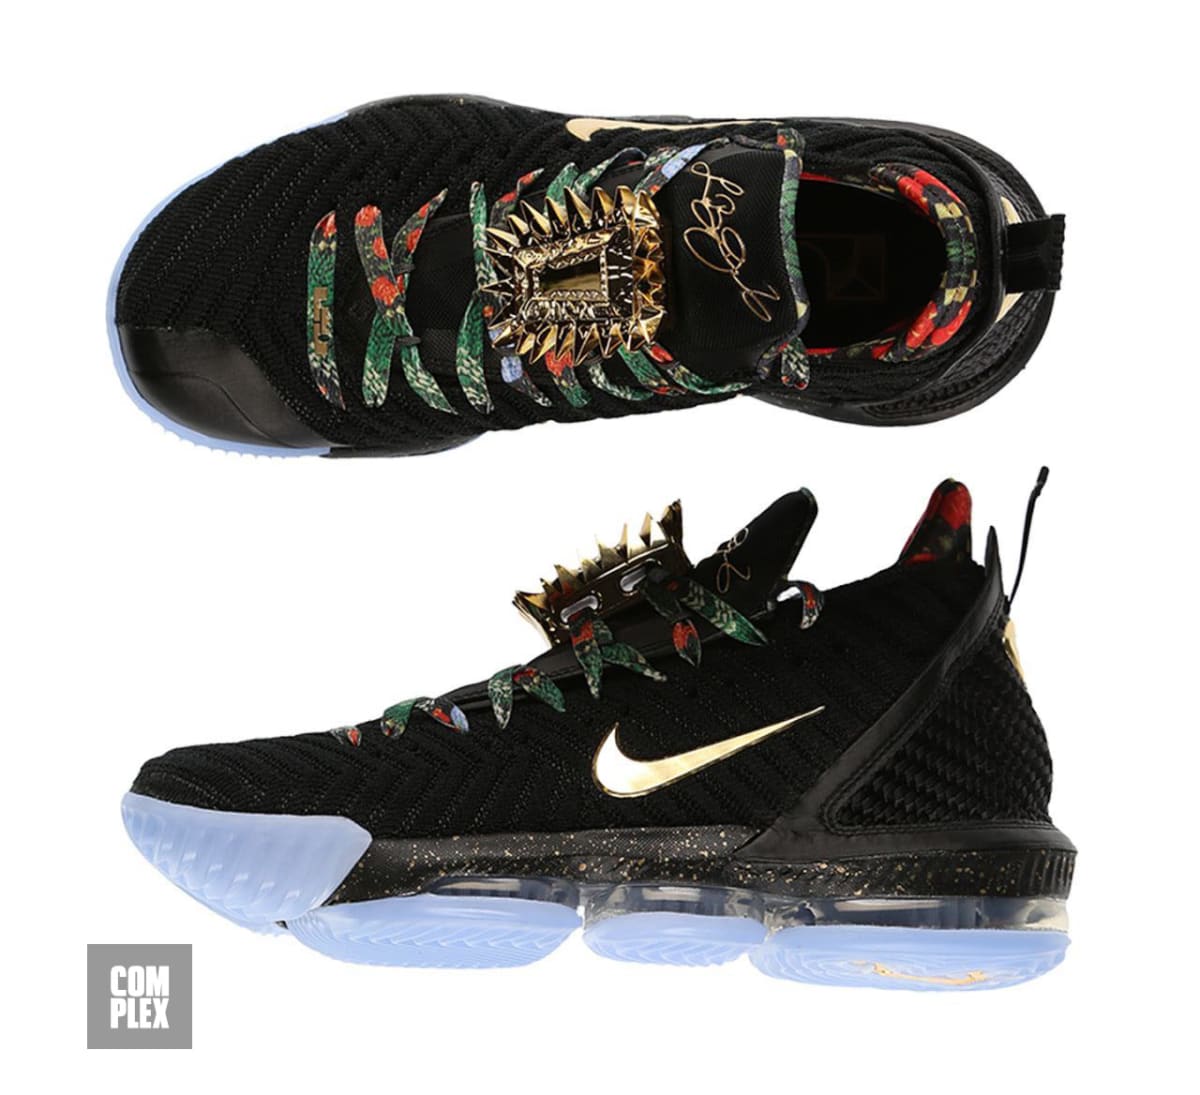 Nike LeBron 16 KC 'Watch the Throne' - Release Roundup: Sneakers You